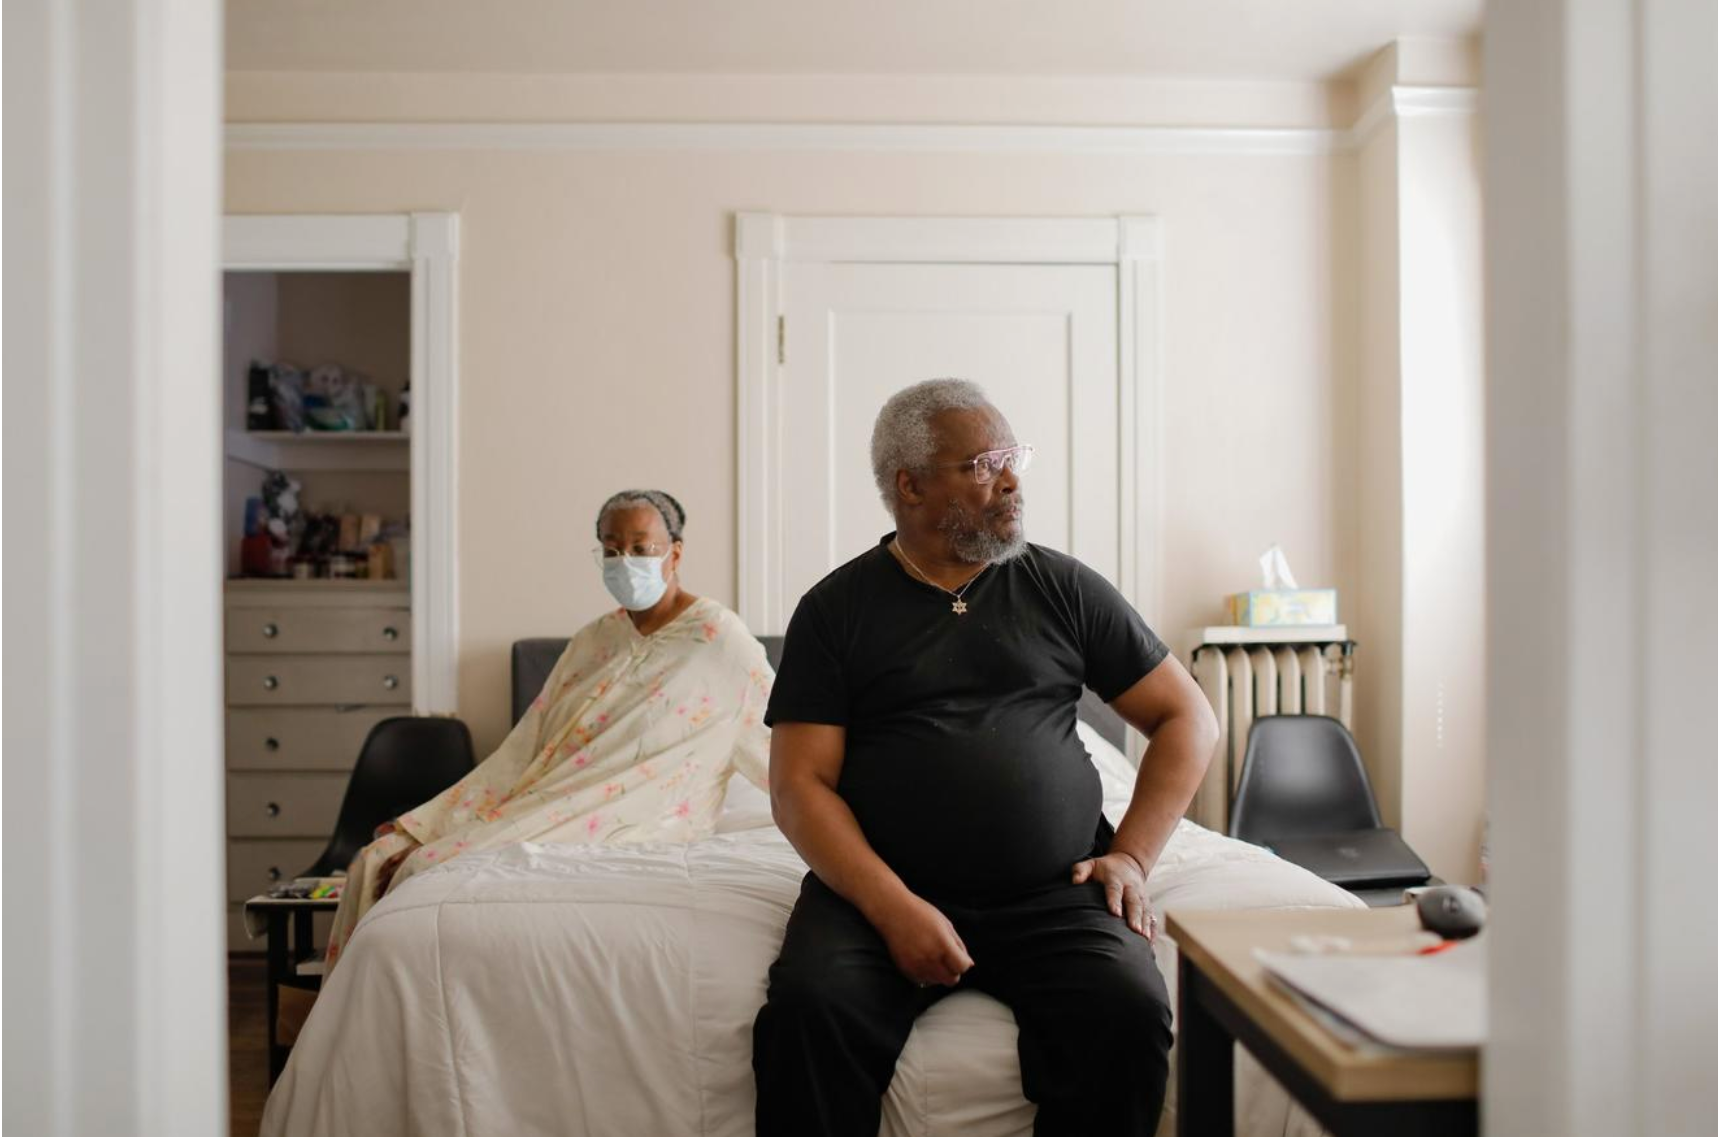 After falling behind on rent, Solomon and Miriam Quick have been given an eviction notice from their landlords at the Biltmore apartments on Capitol Hill, where they have lived for six years. Eviction filings in Washington are on the rise, more than doubling over the past six months. 